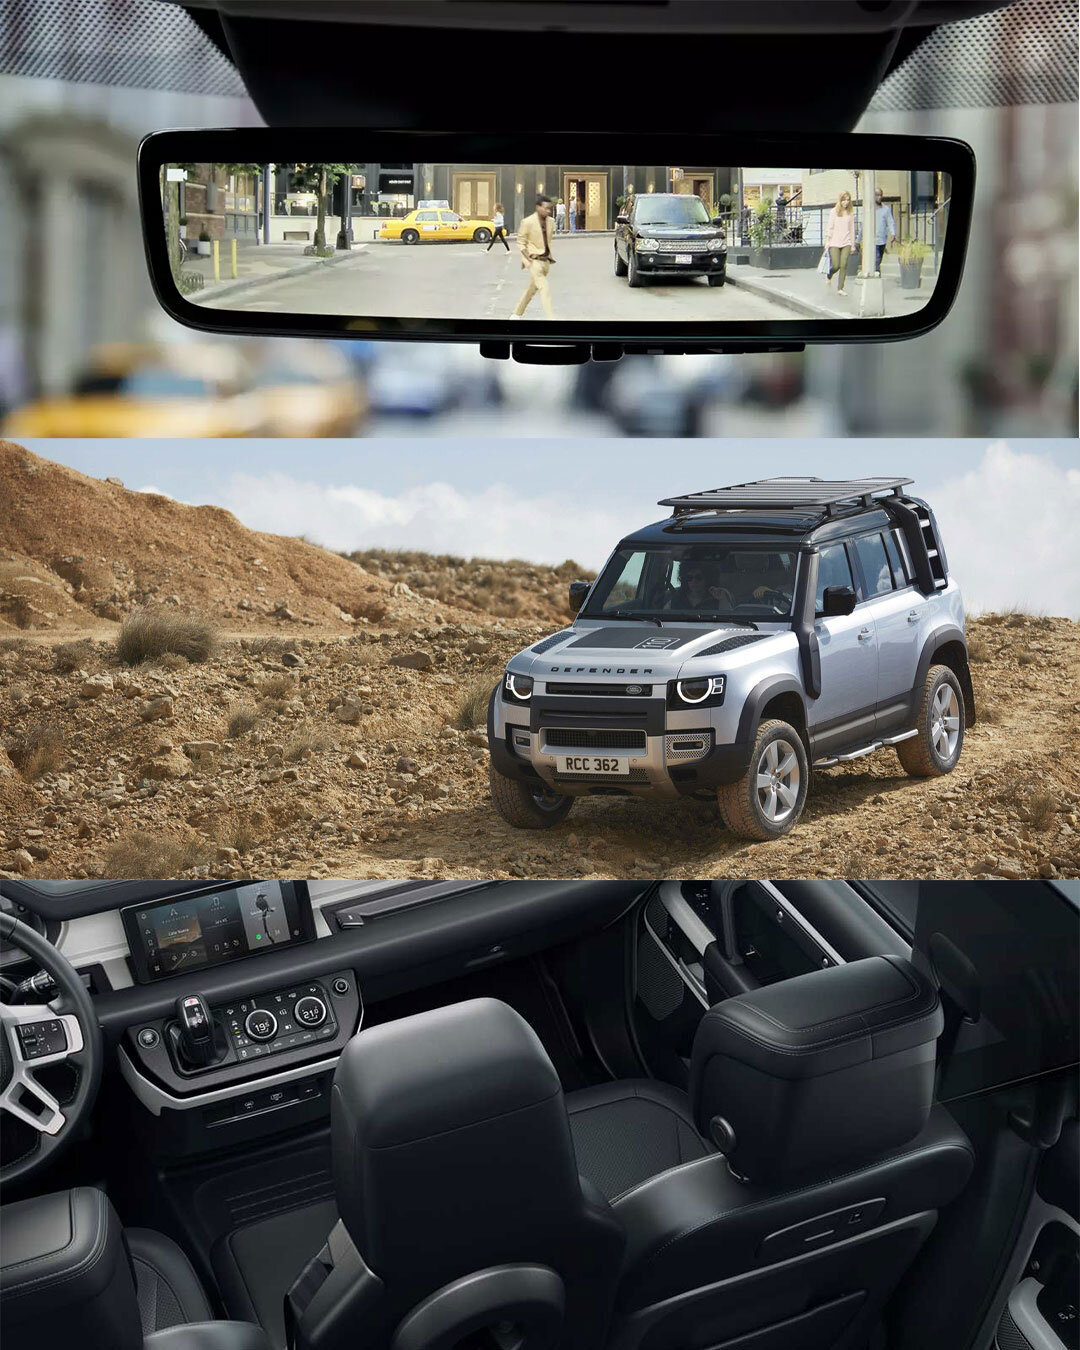 3 Rad Accessories we can install for you. 
1️⃣ CLEARSIGHT DIGITAL REARVIEW MIRROR
2️⃣ RAISED AIR INTAKE
3️⃣ FRONT JUMP SEAT

Did you receive a high quote? 🤔😰??? Come to us for a Complimentary 2nd opinion. 🧐

Check Engine Light On? 🤬
Overheat issu